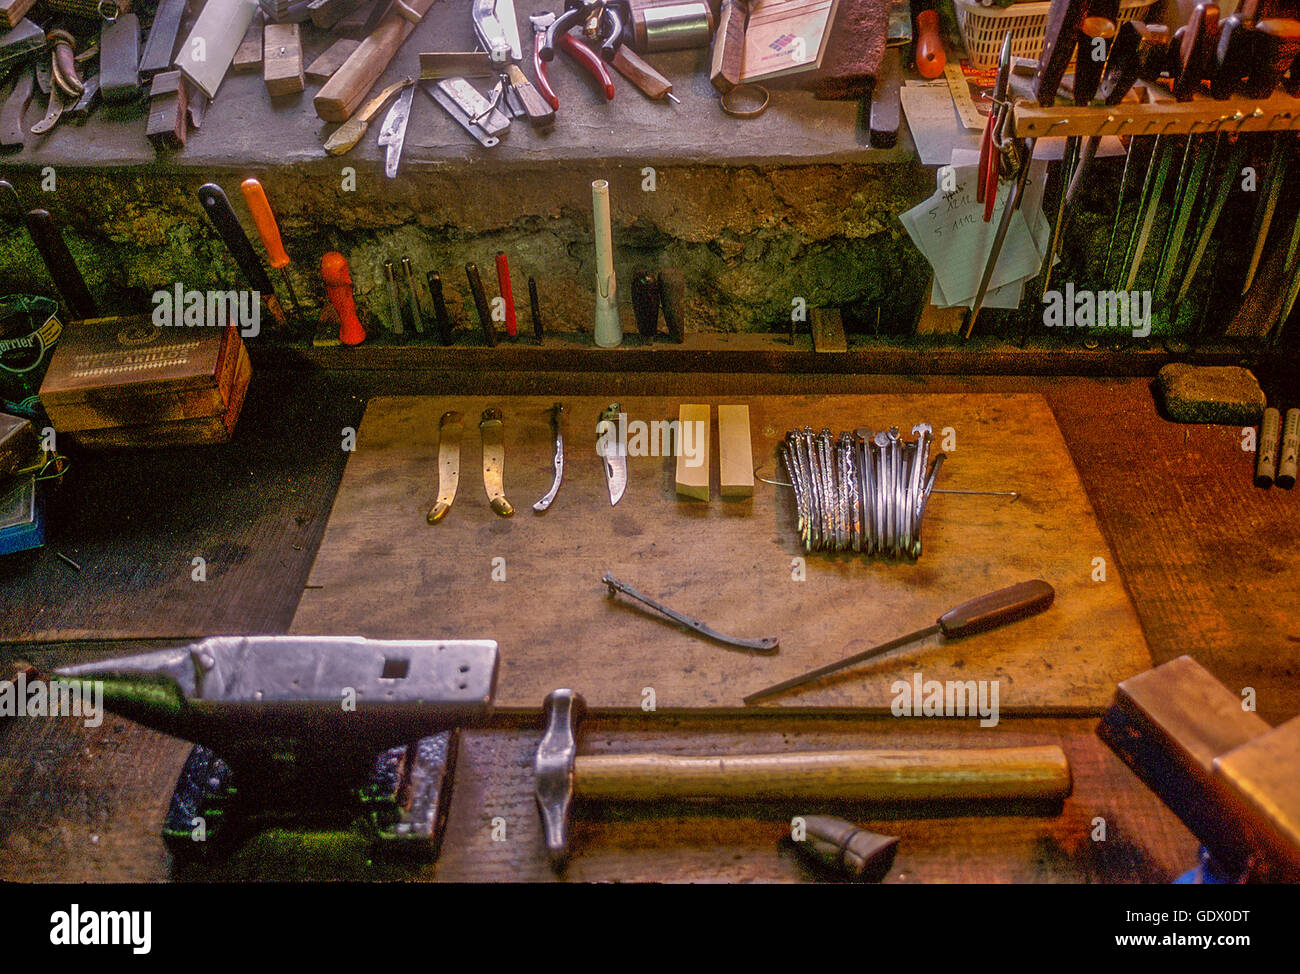 production of knives in Laguiole, France Stock Photo